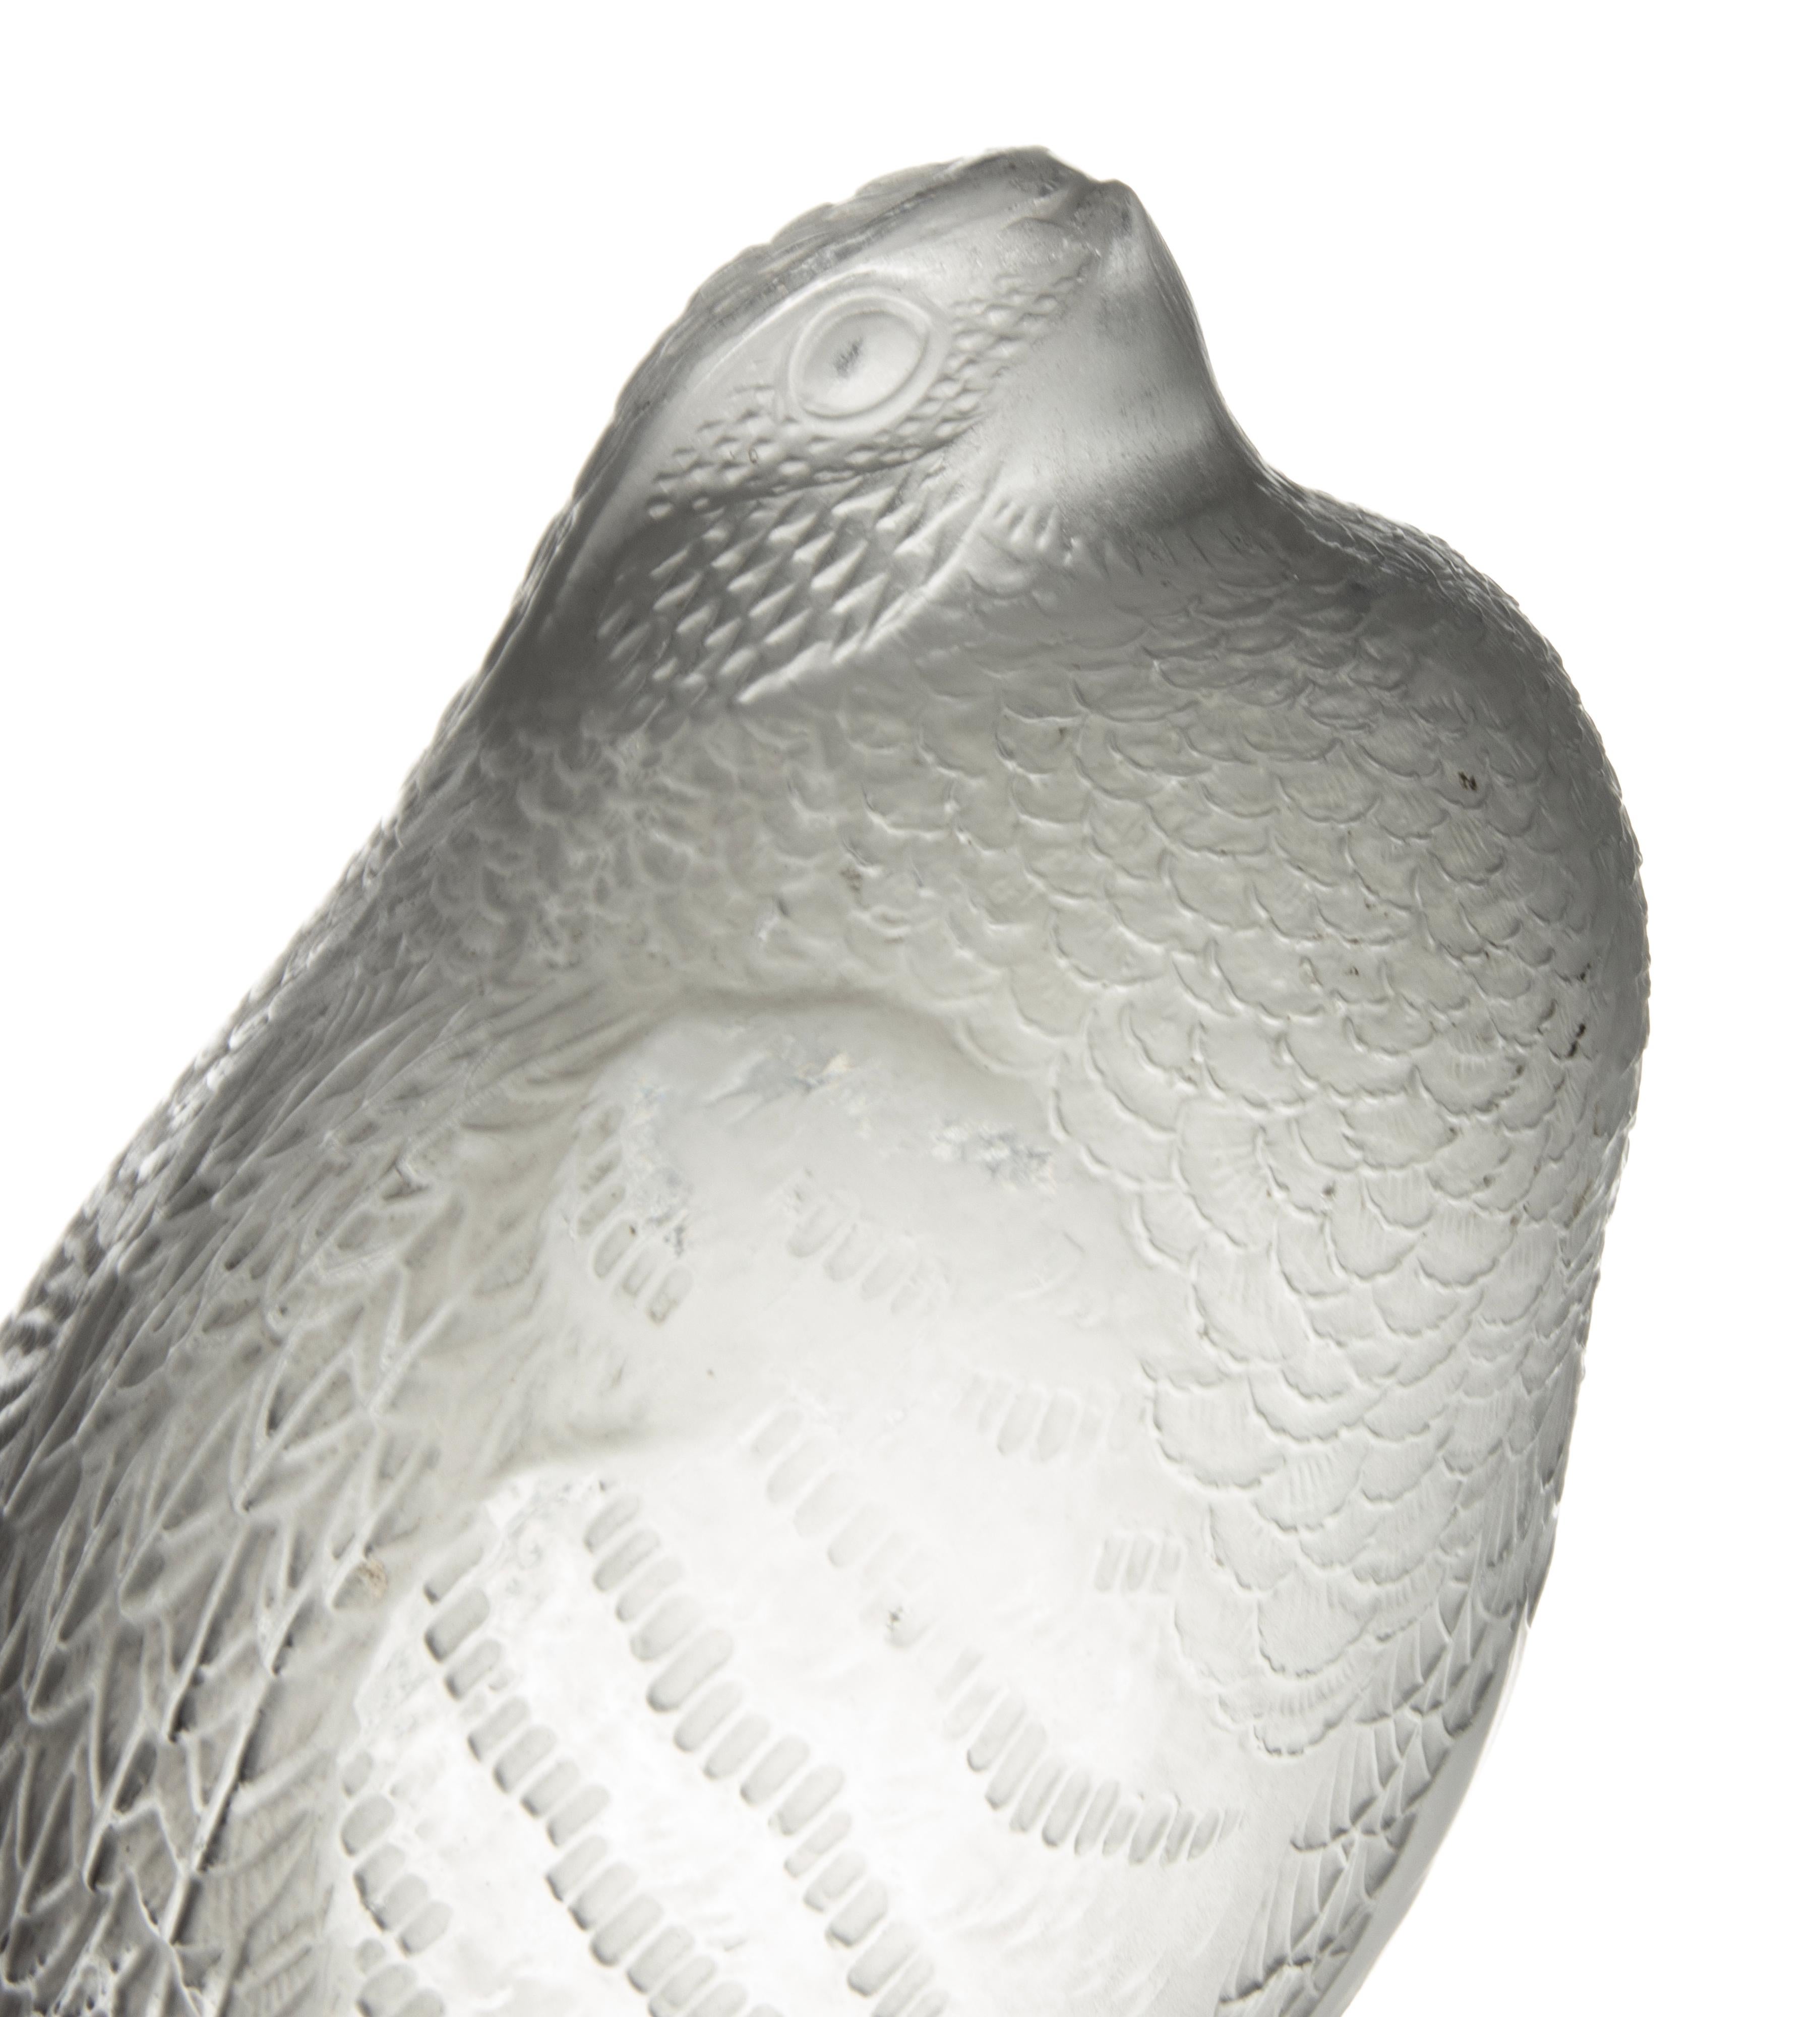 Mid-Century Modern Crystal Paperweight / Figurine of a Quail Bird, Lalique In Good Condition For Sale In Casteren, Noord-Brabant